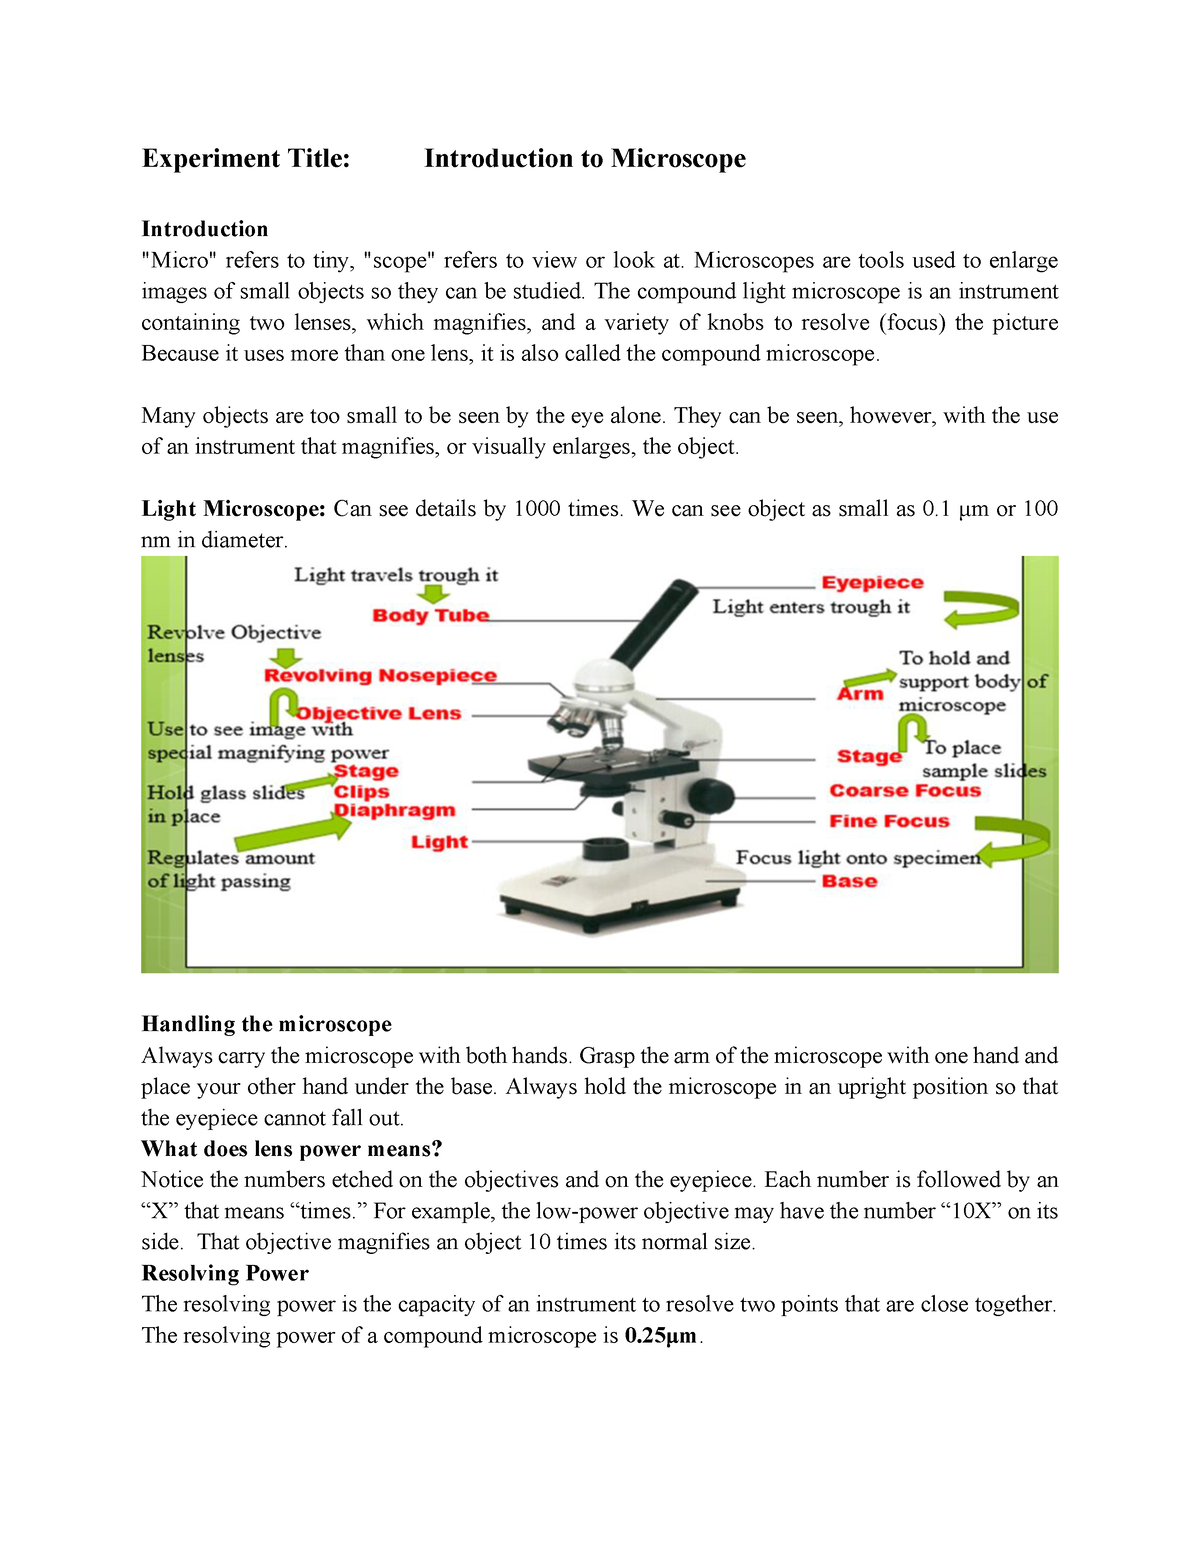 introducing the microscope essay